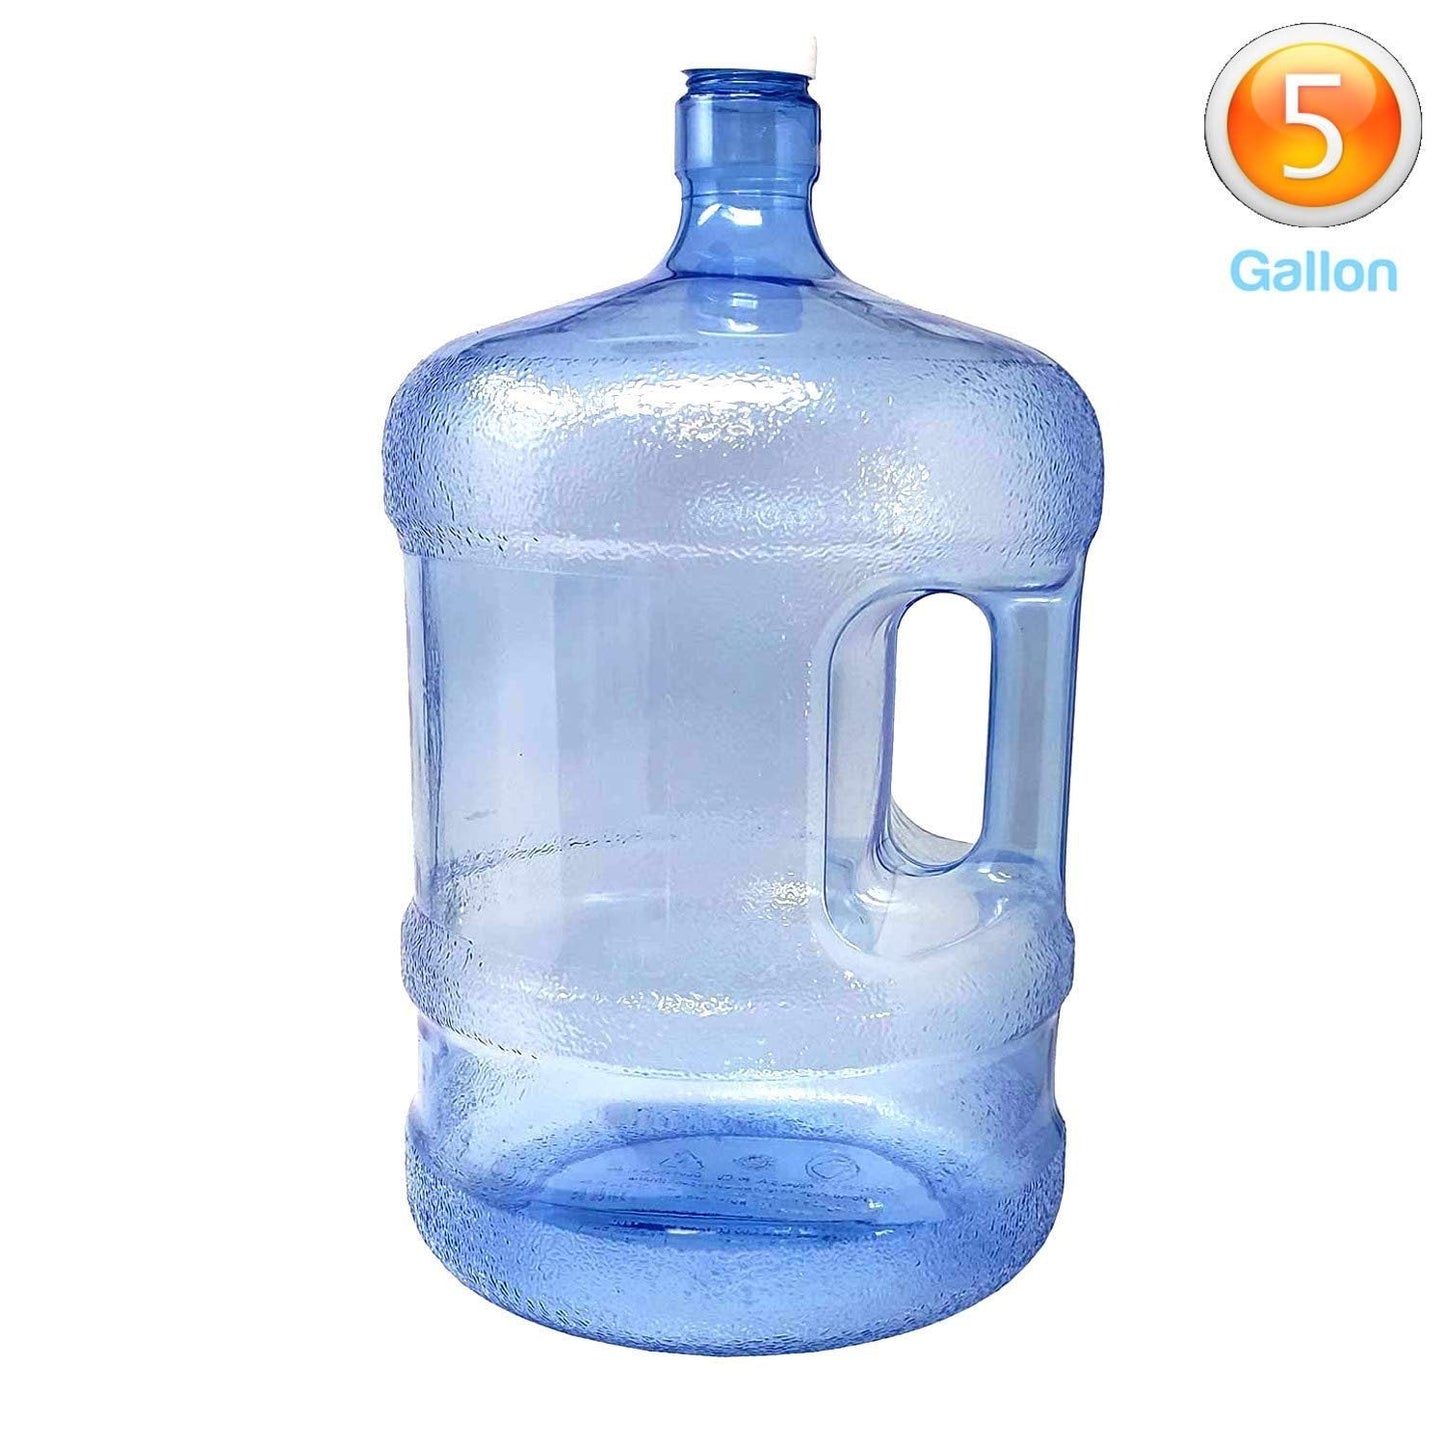 3 GAL Blue Plastic Jug / Water Container With White Cap